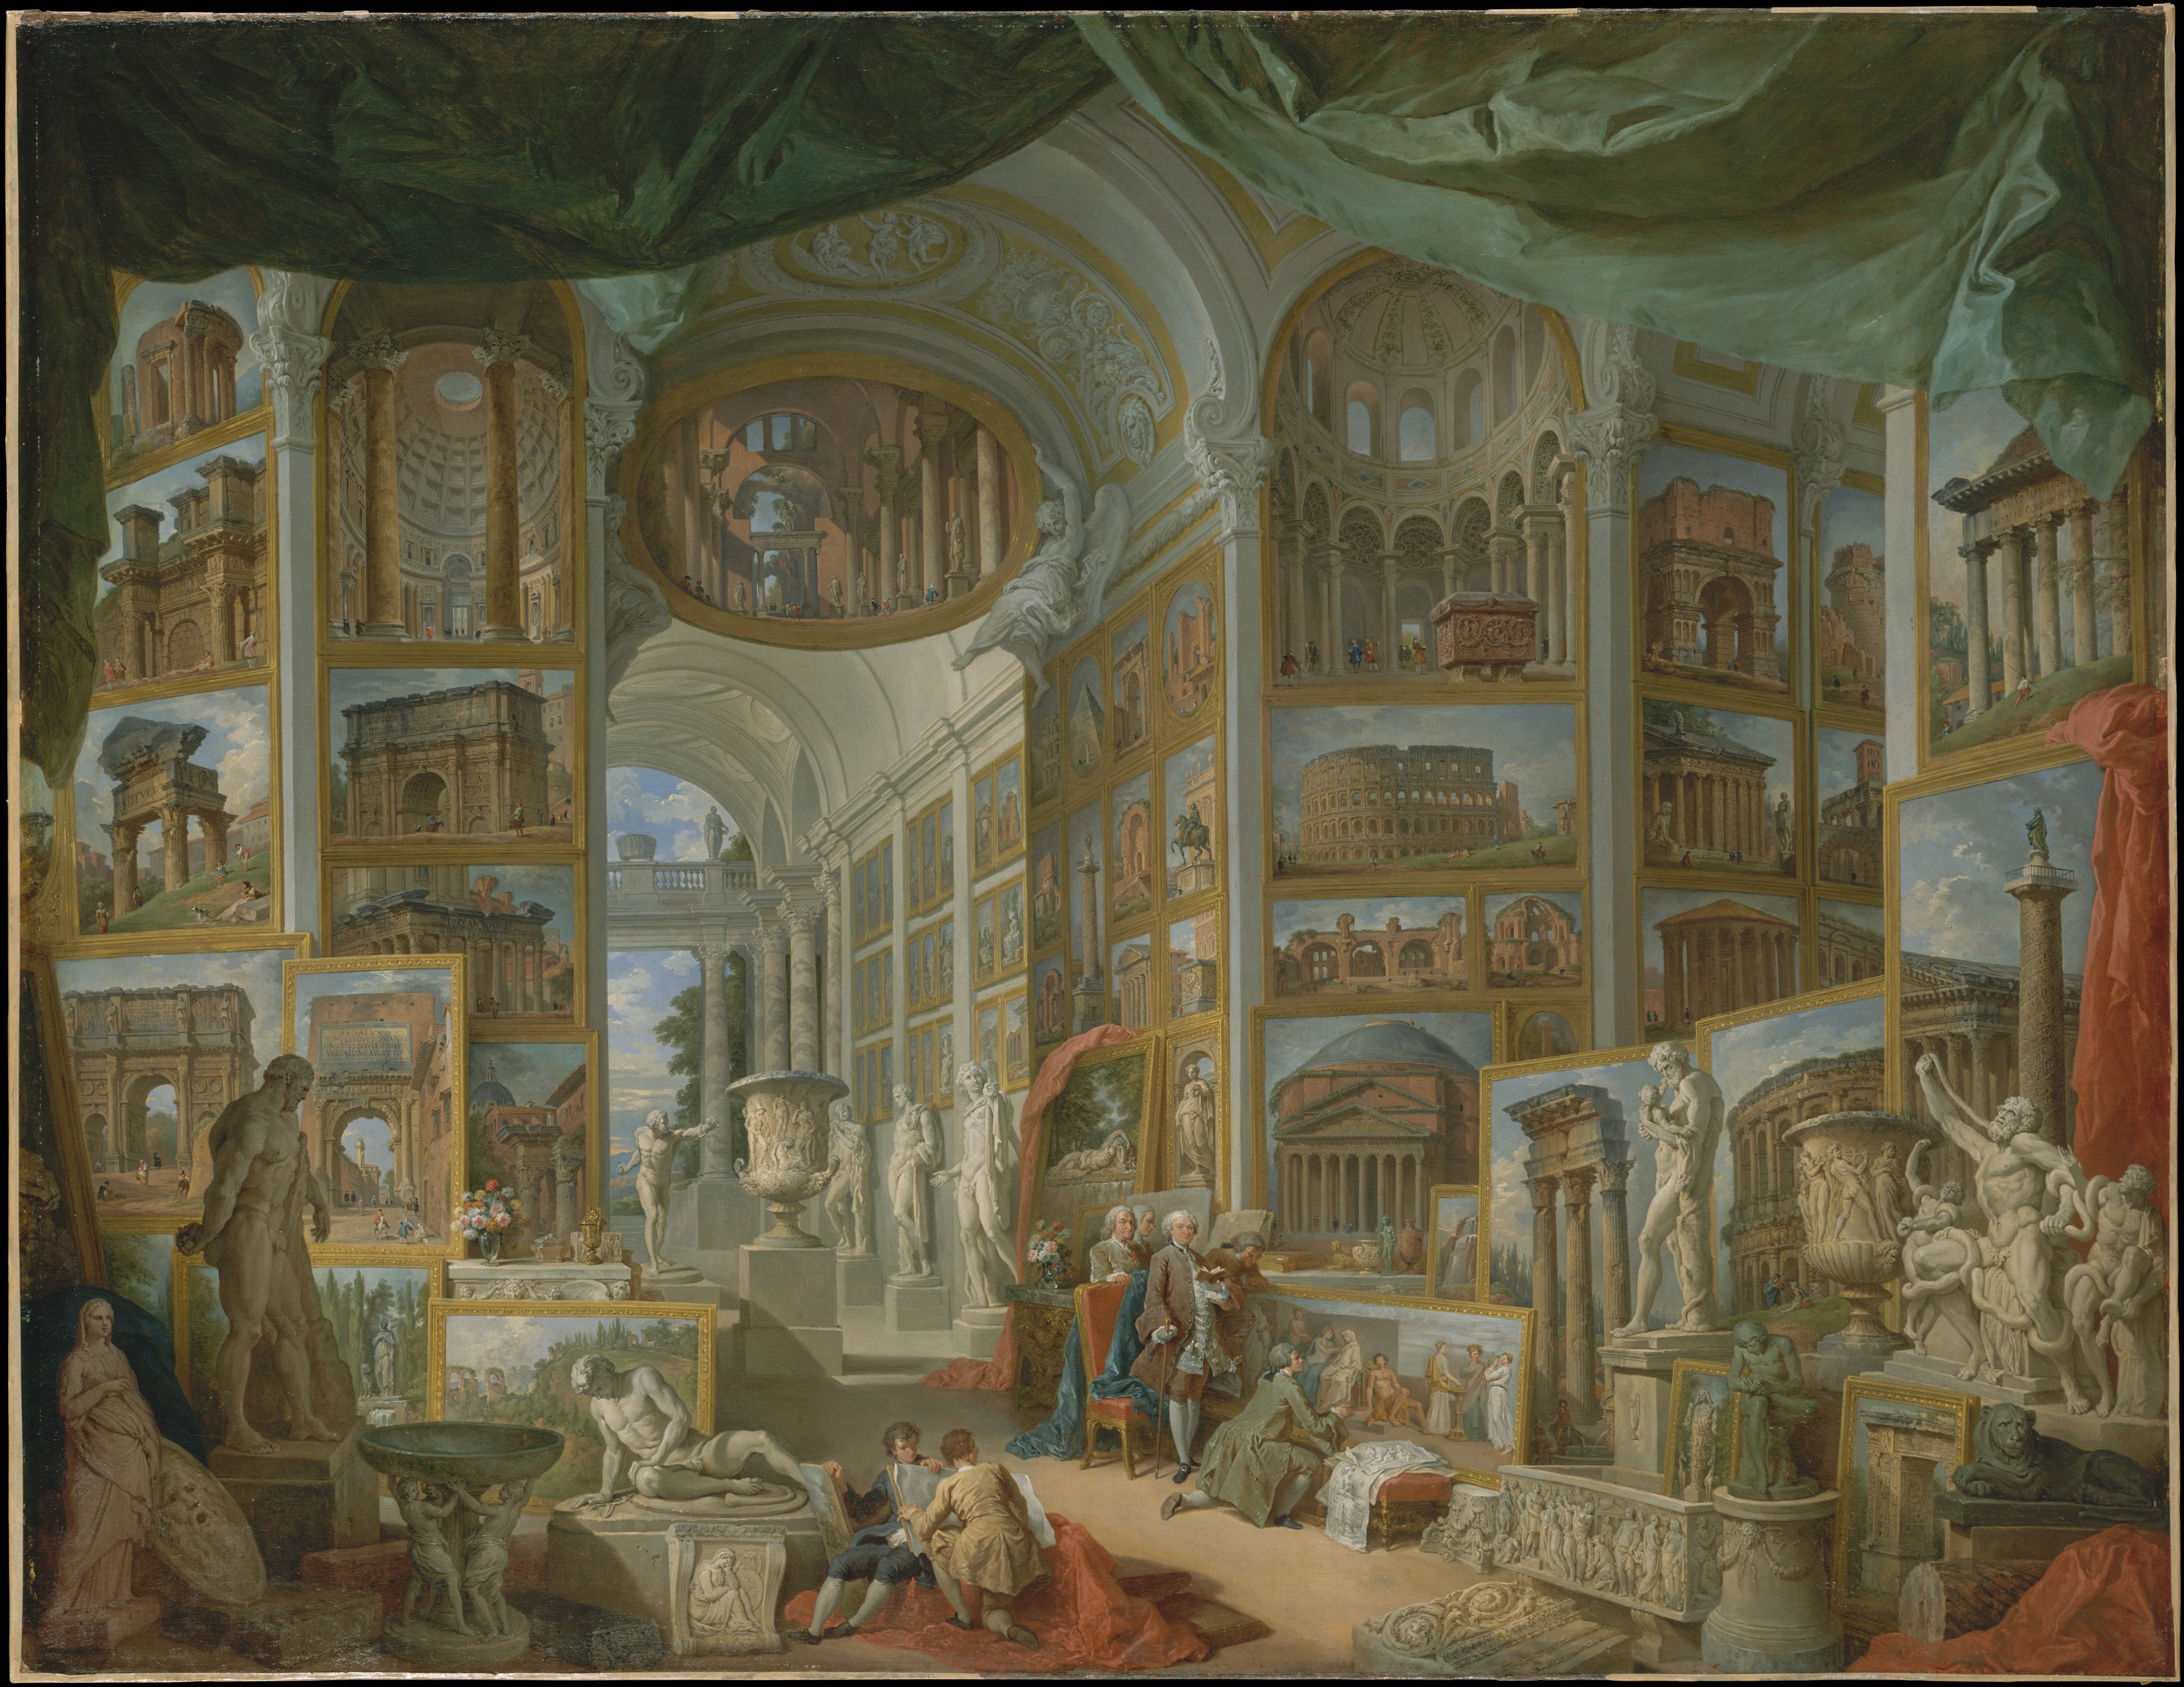 Ancient Rome by Giovanni Paolo Panini - ca. 1757 - 172.1 x 229.9 cm Metropolitan Museum of Art